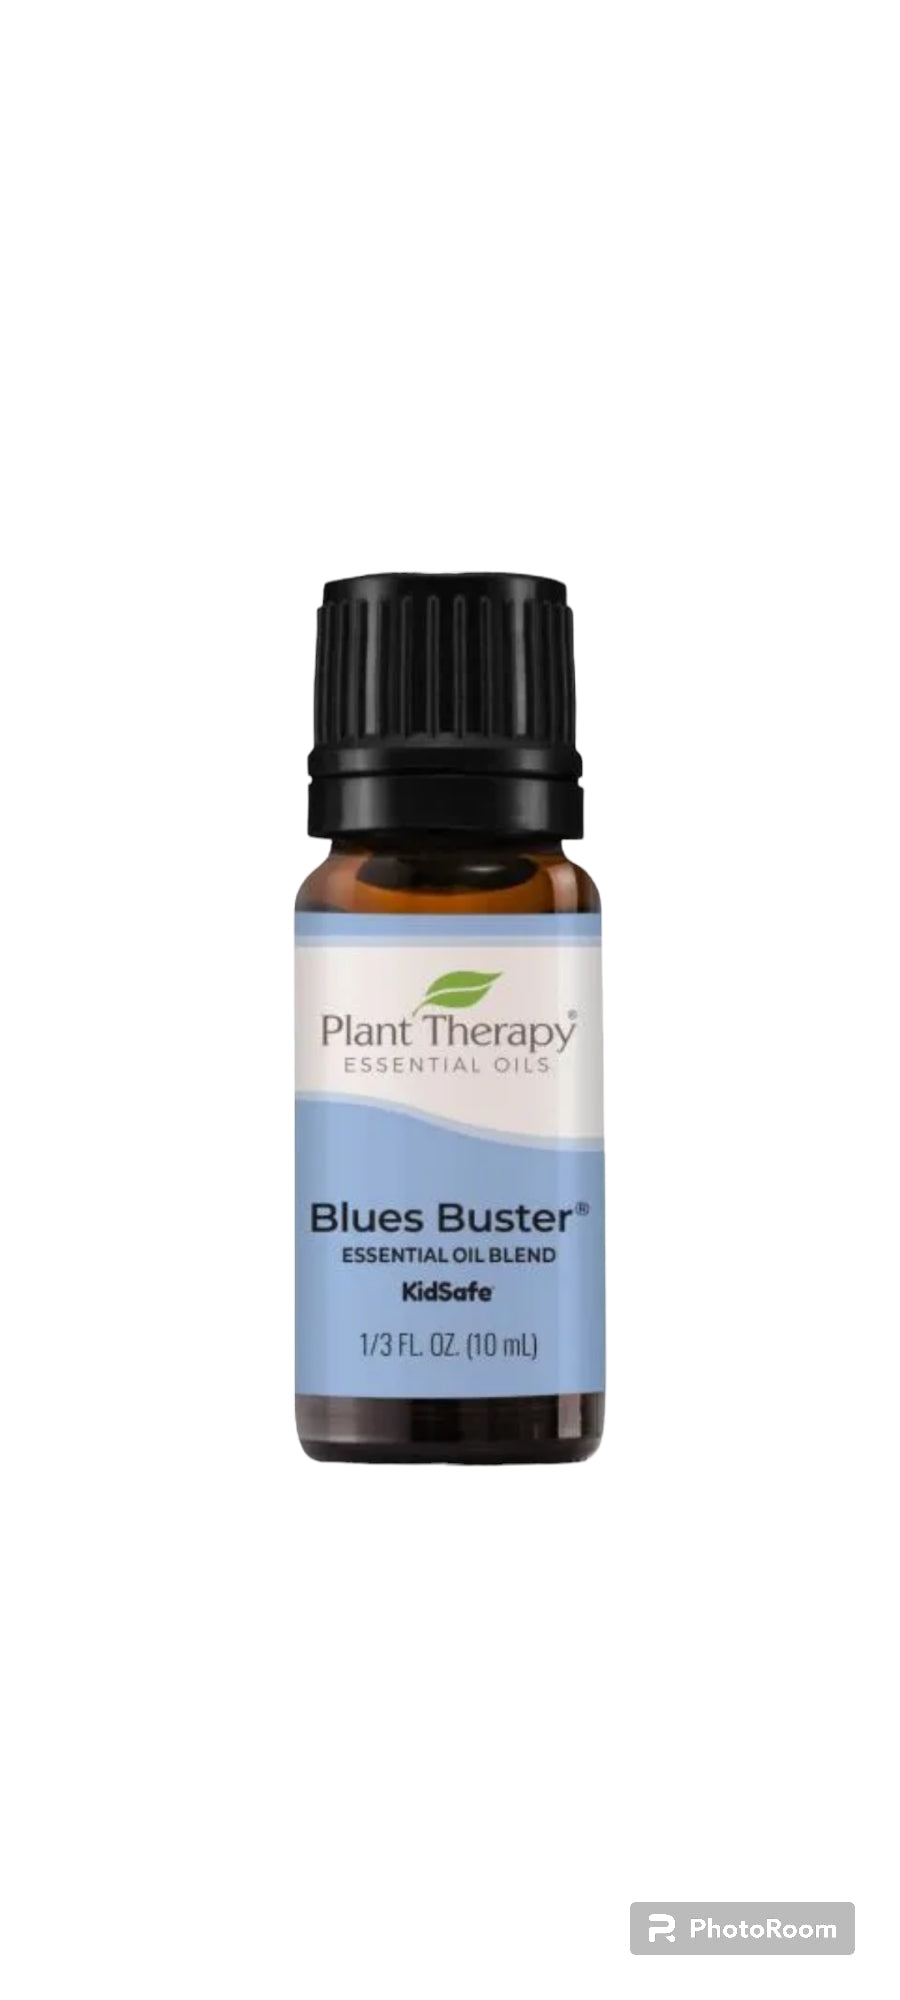 Blues Buster essential oil blend